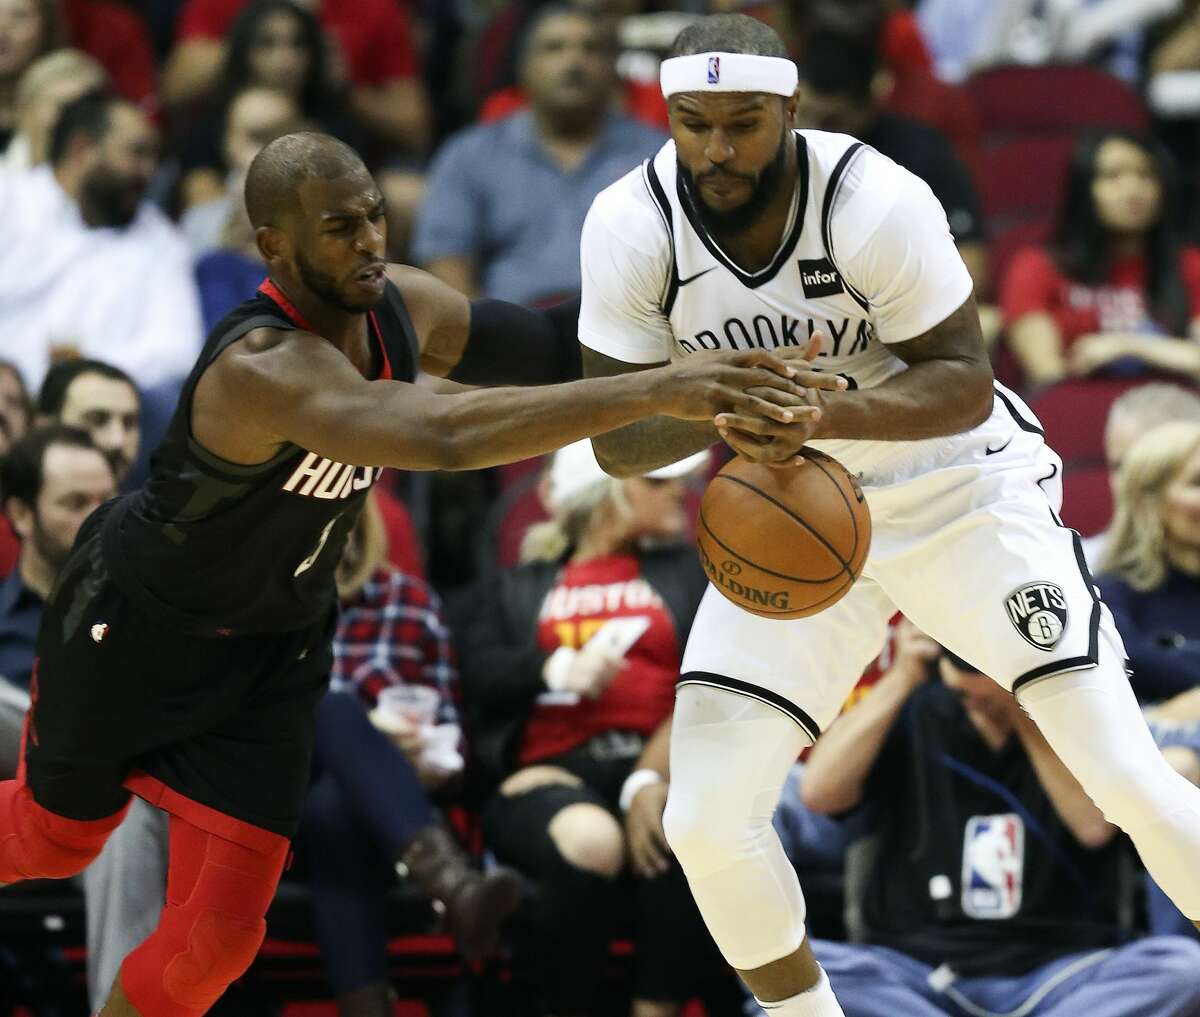 Houston Rockets guard Chris Paul, left, steals the ball from Brooklyn Nets forward Trevor Booker during the first half of an NBA basketball game, Monday, Nov. 27, 2017, in Houston. (AP Photo/Eric Christian Smith)